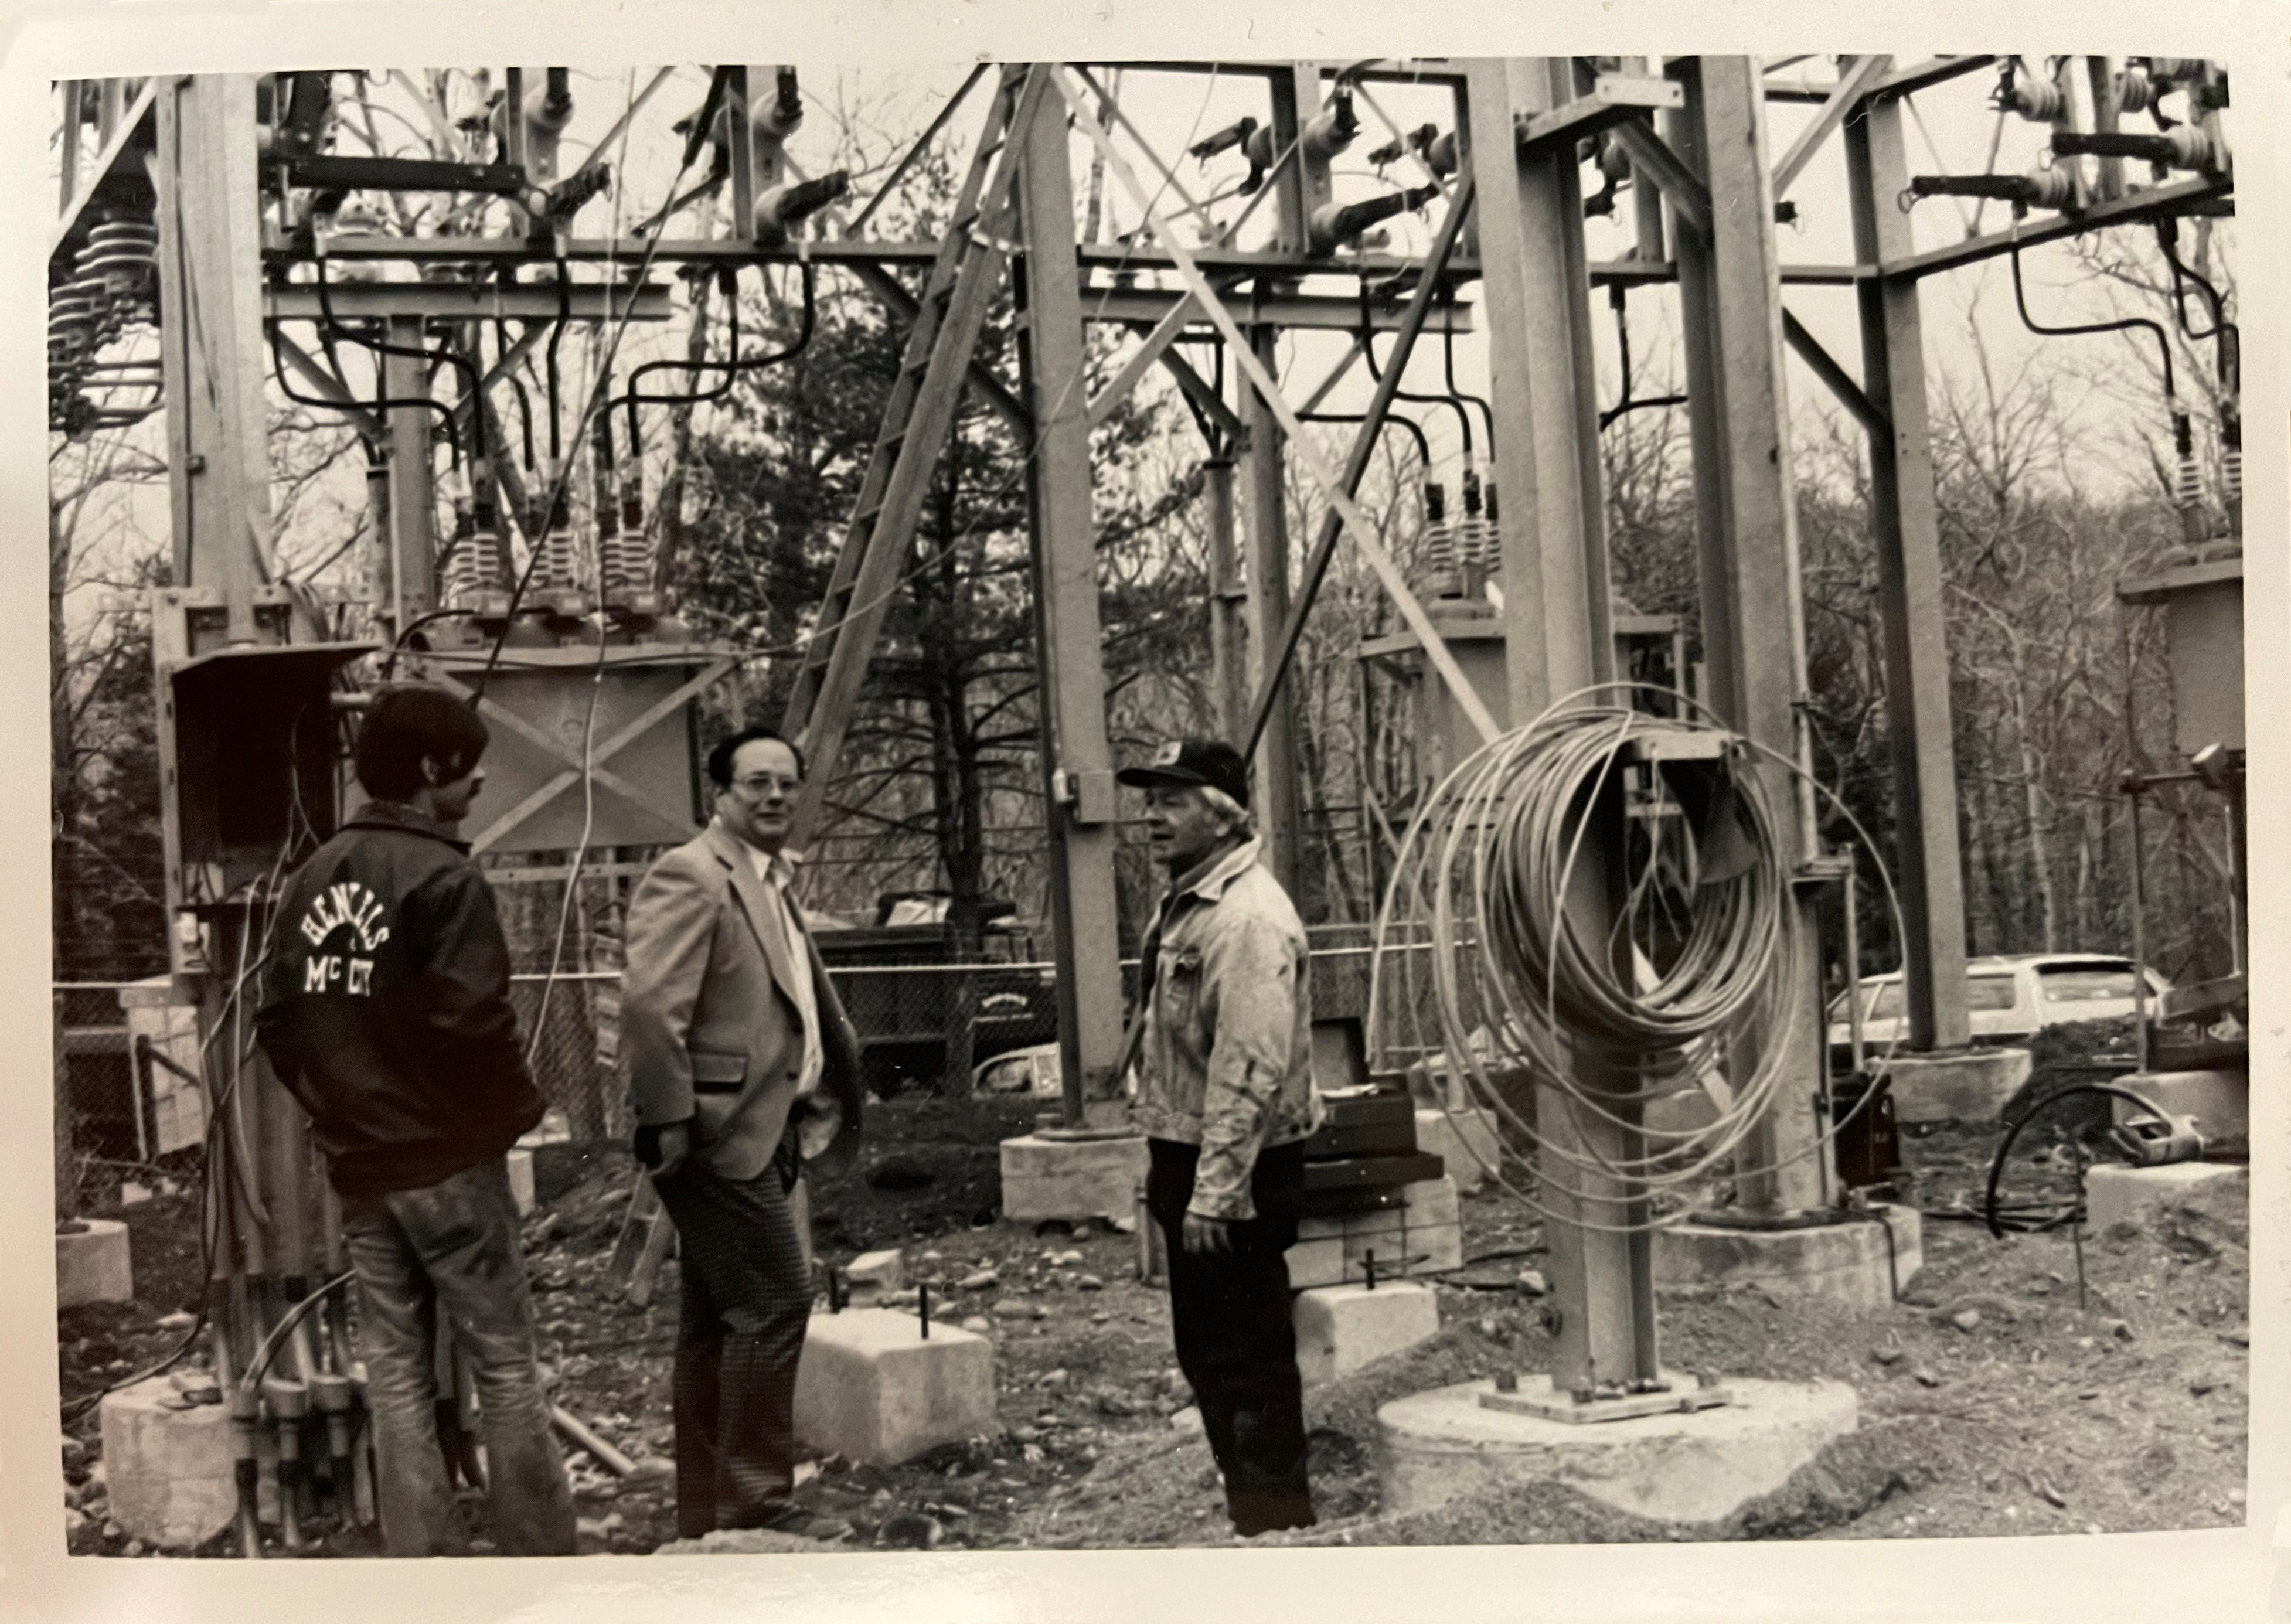 Pictured: 1978 black-and-white photo of SREC workers in the newly constructed Barry Lakes substation, which serves the Barry Lakes area, Lake Wanda, and portions of Highland Lakes.